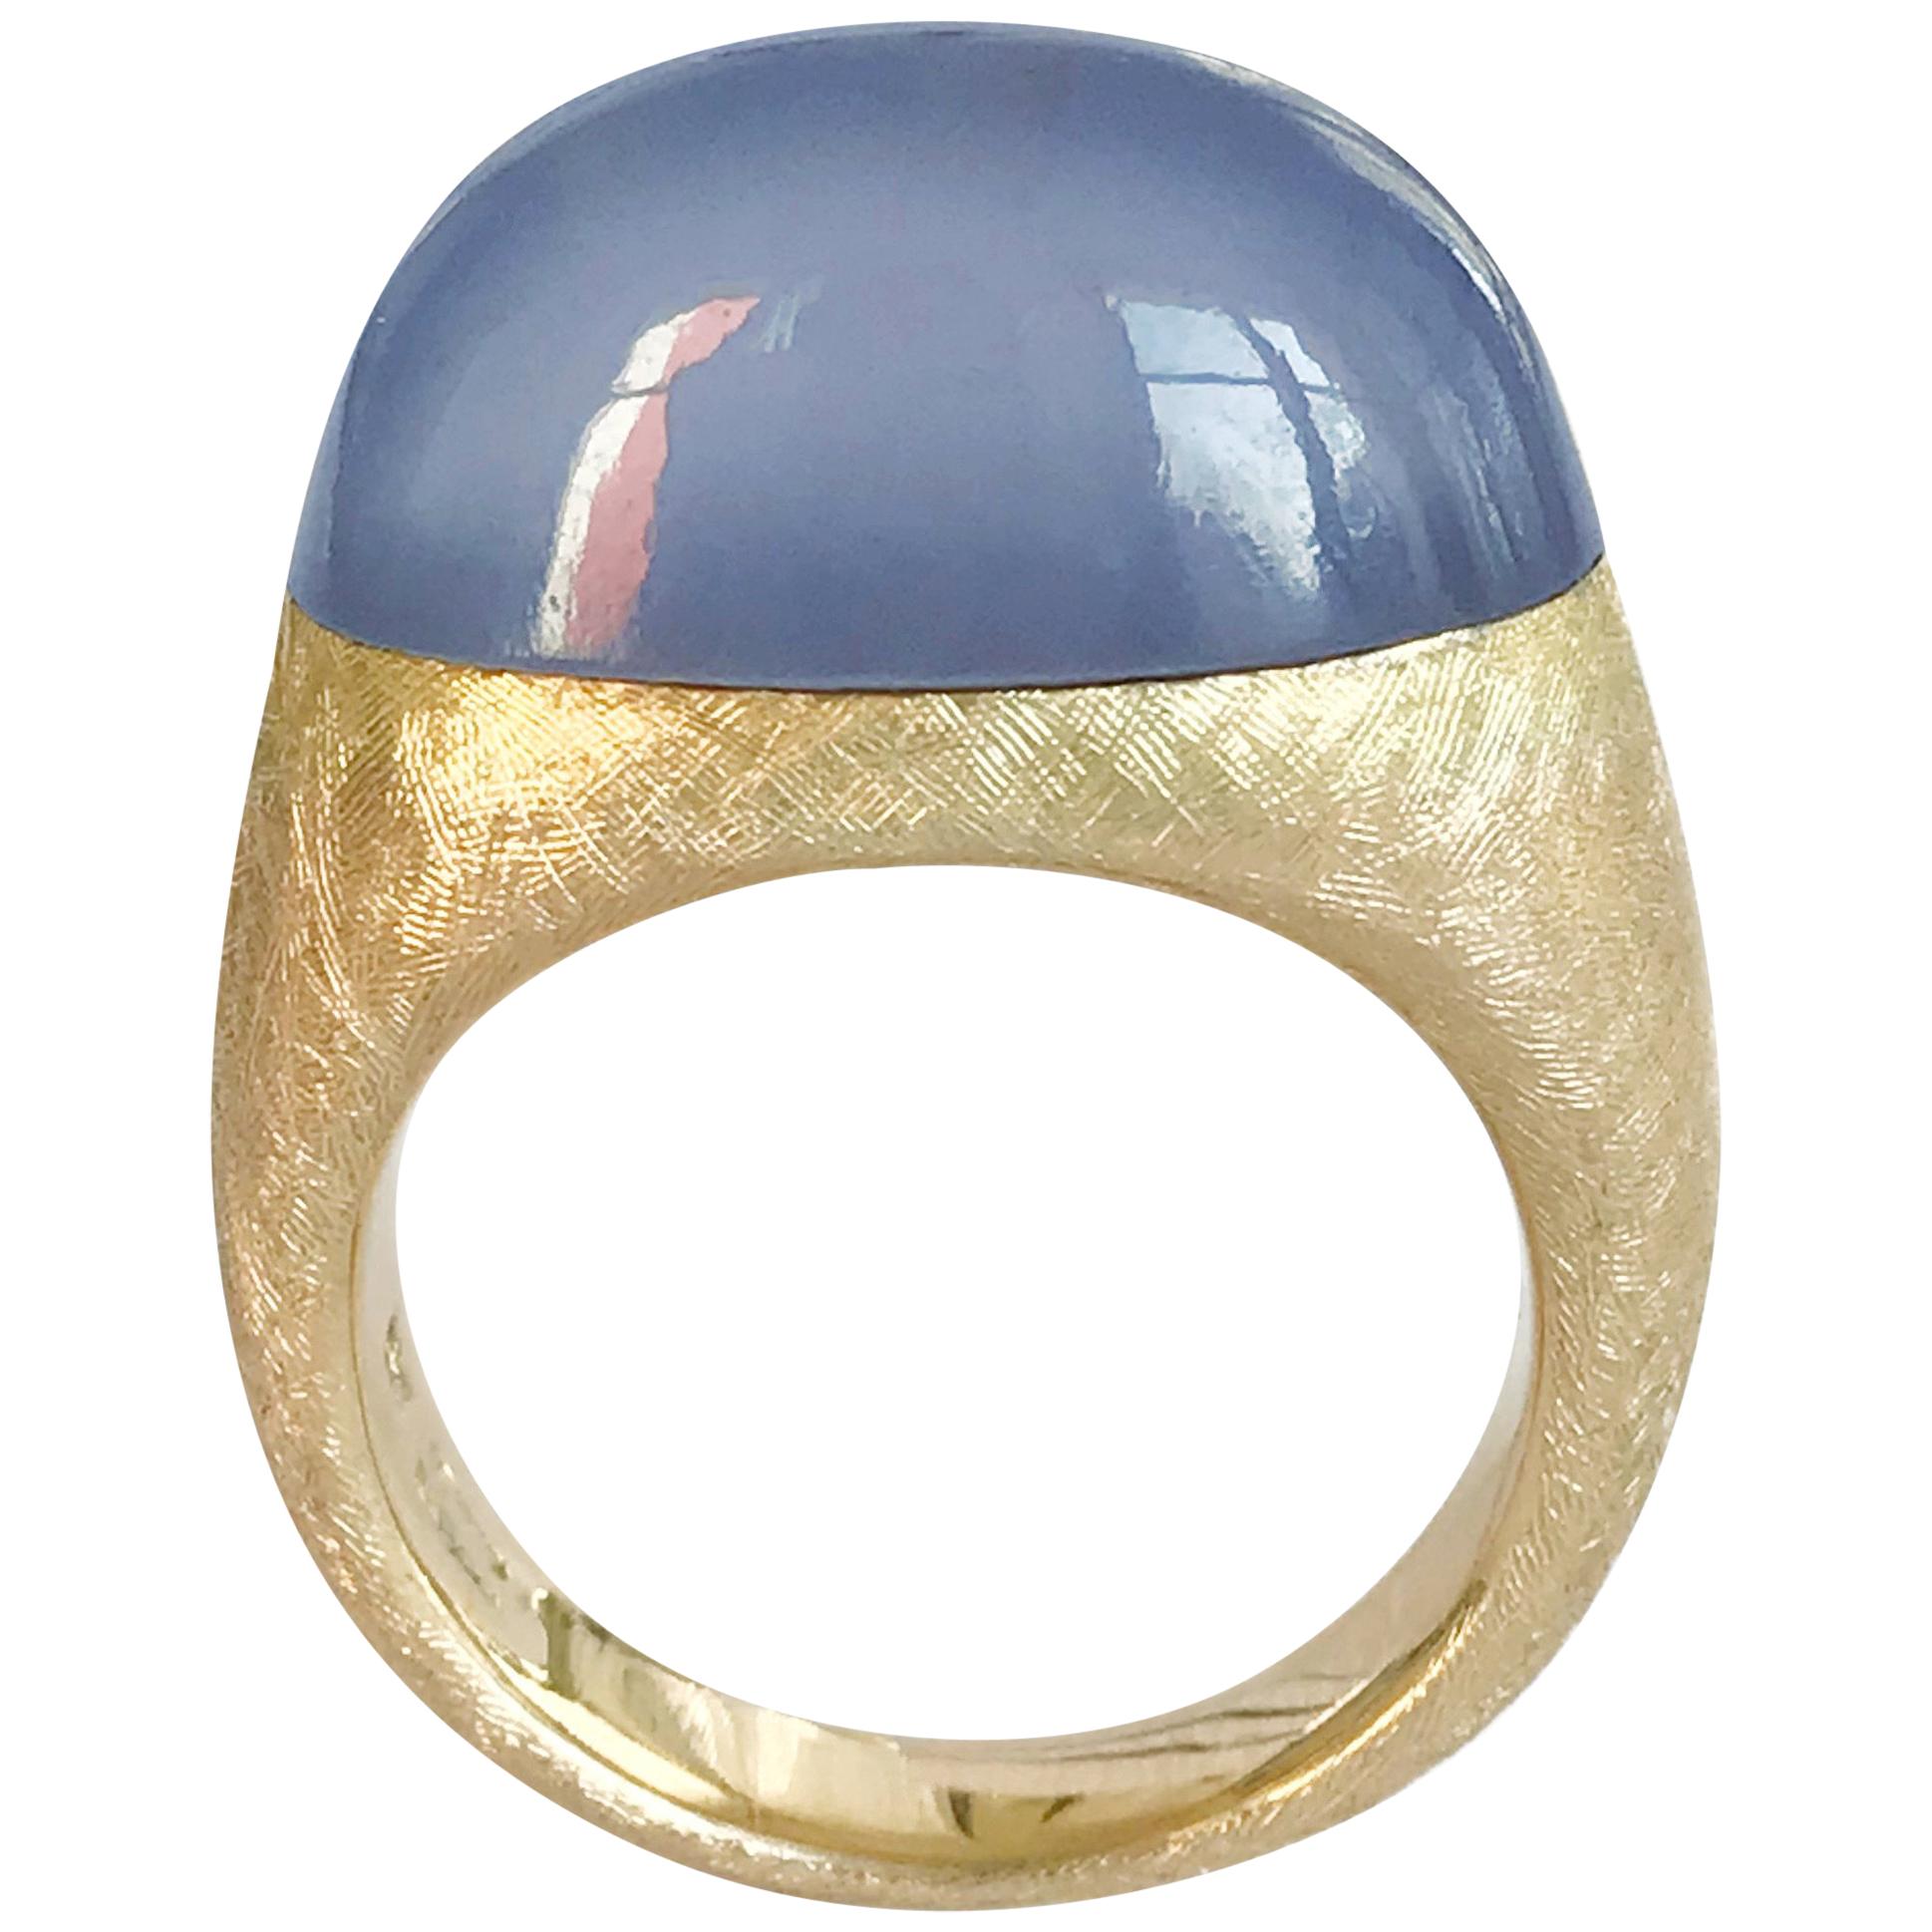 Dalben Namibian Chalcedony Gold Ring For Sale